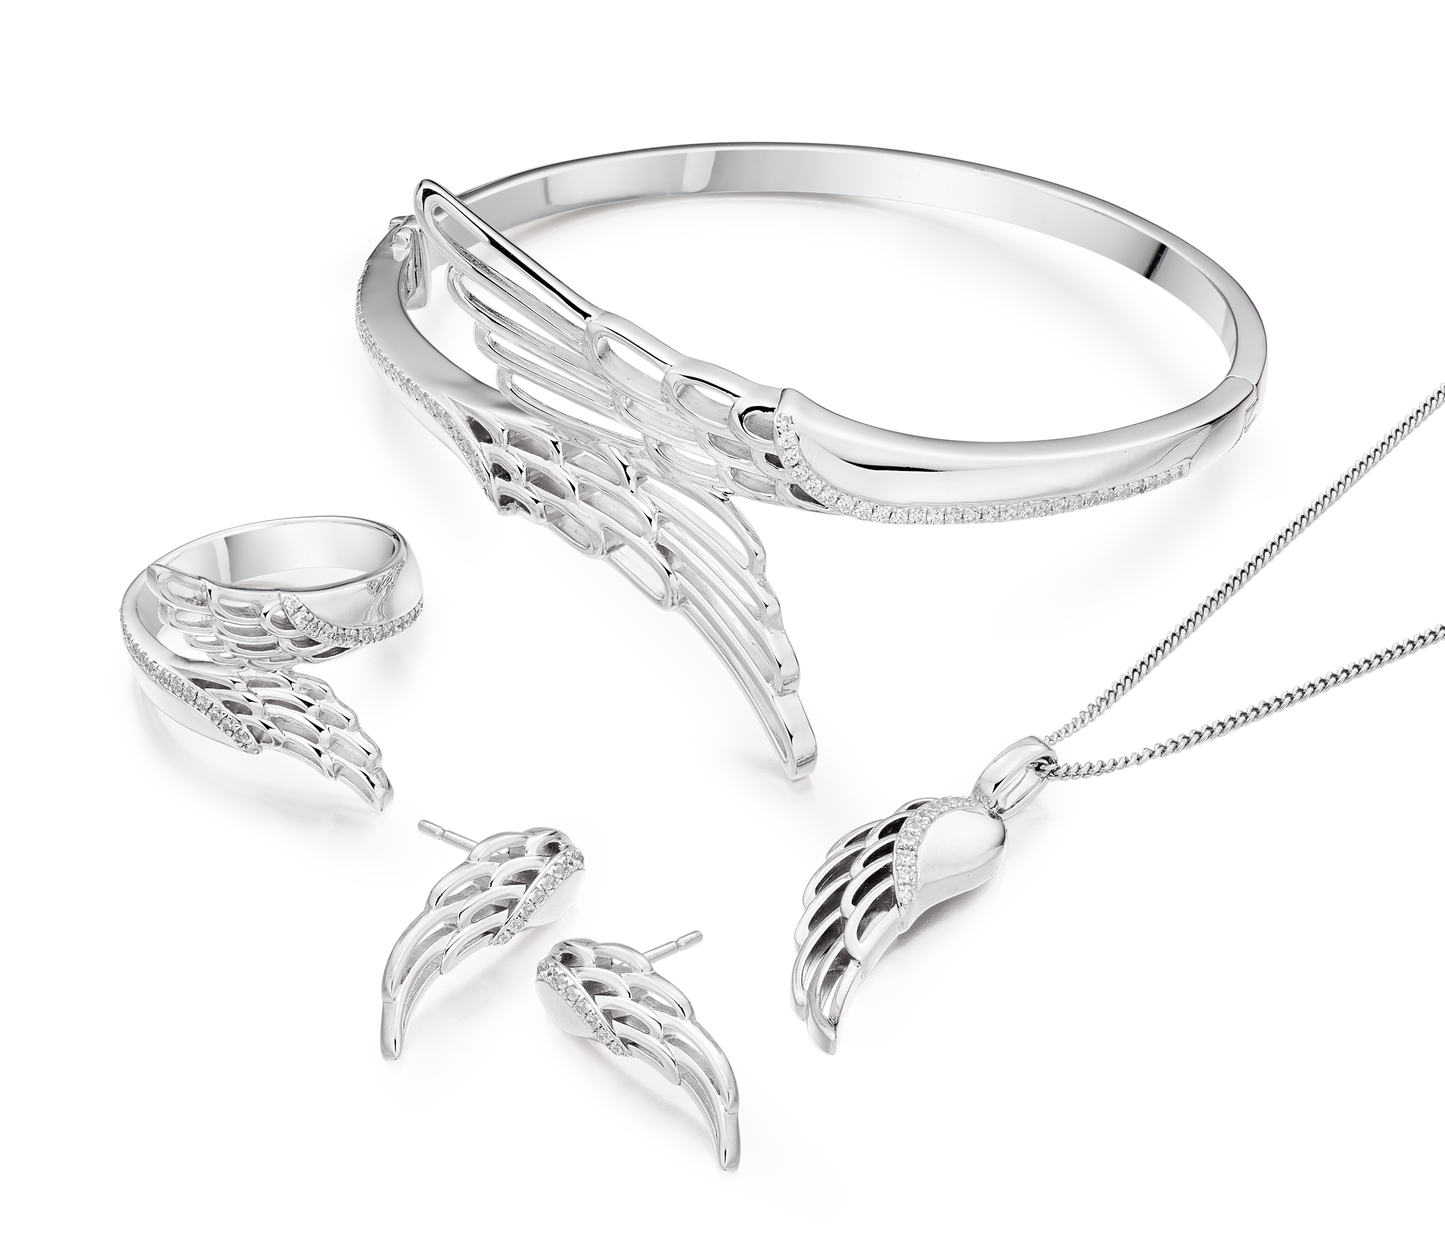 Angel wing set that is available